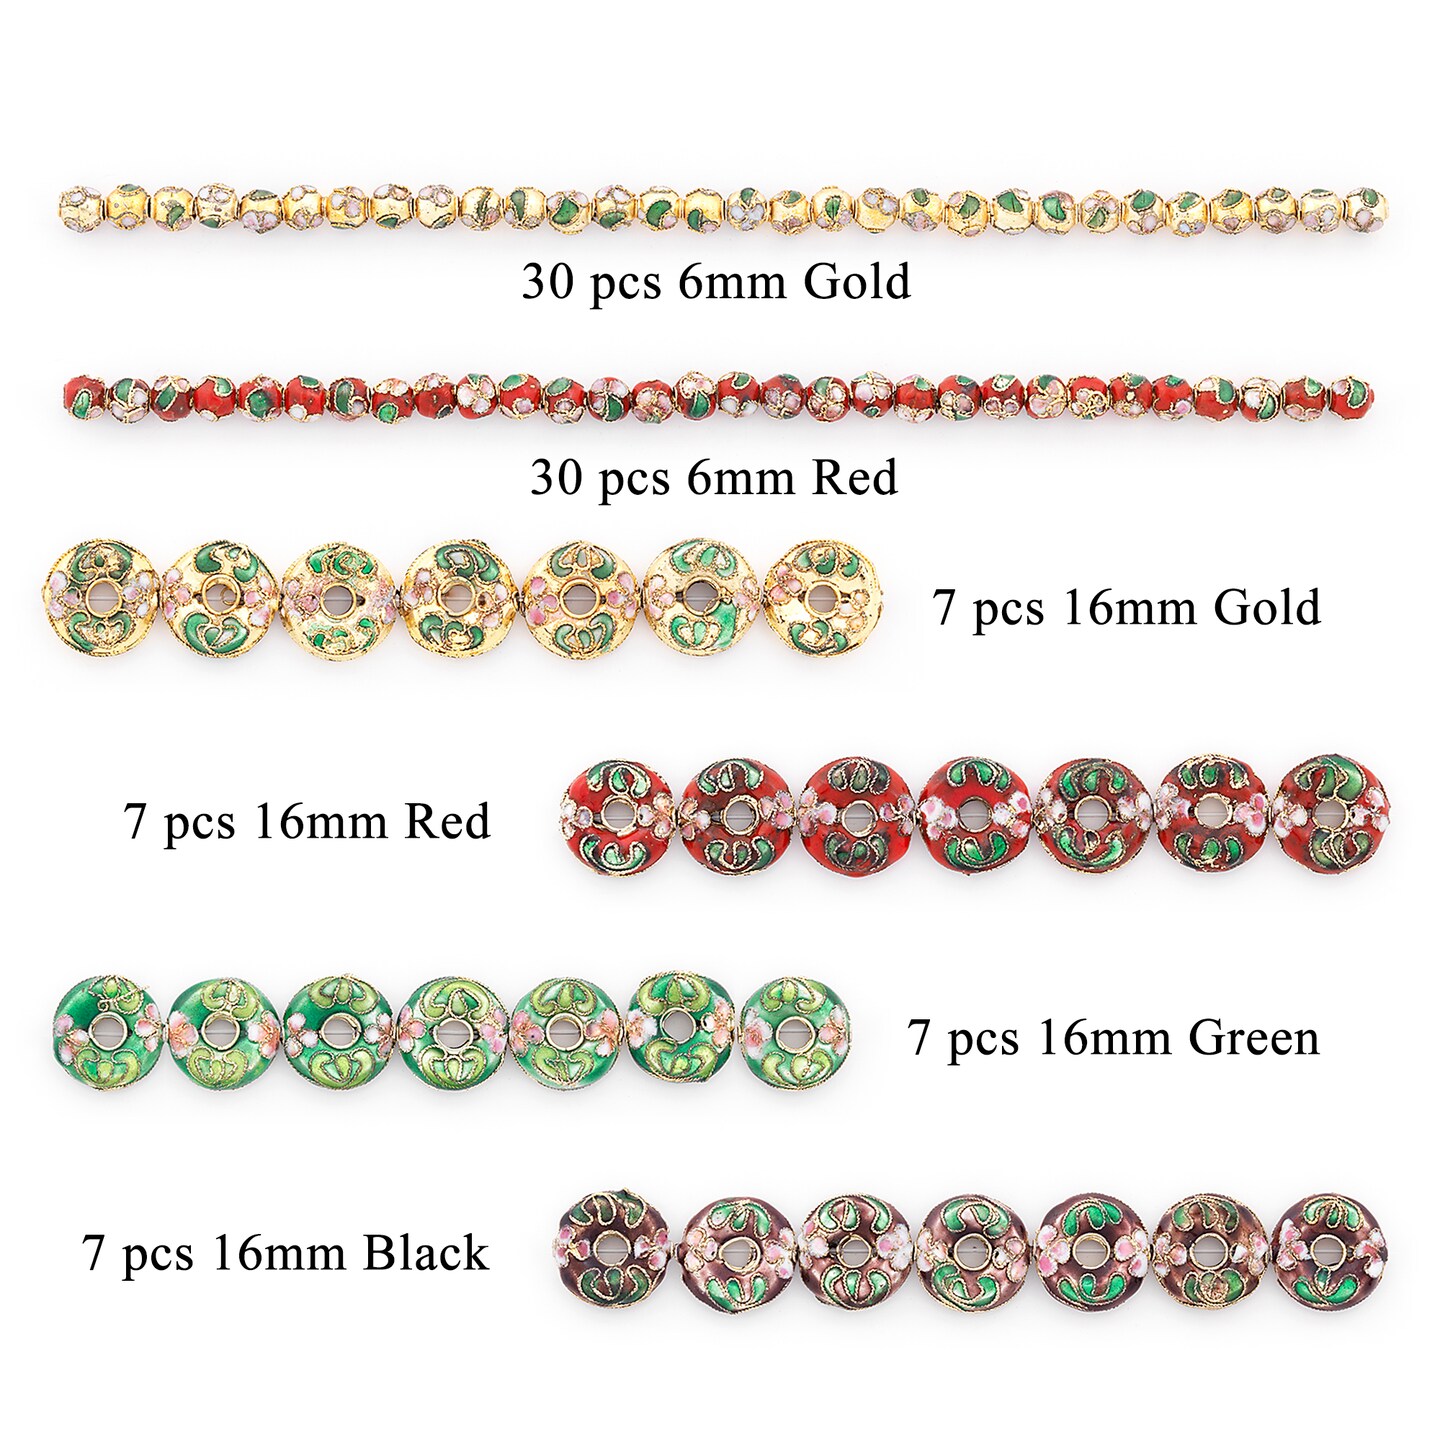 Vintage Hand Painted Classic Cloisonne Bead Value Pack